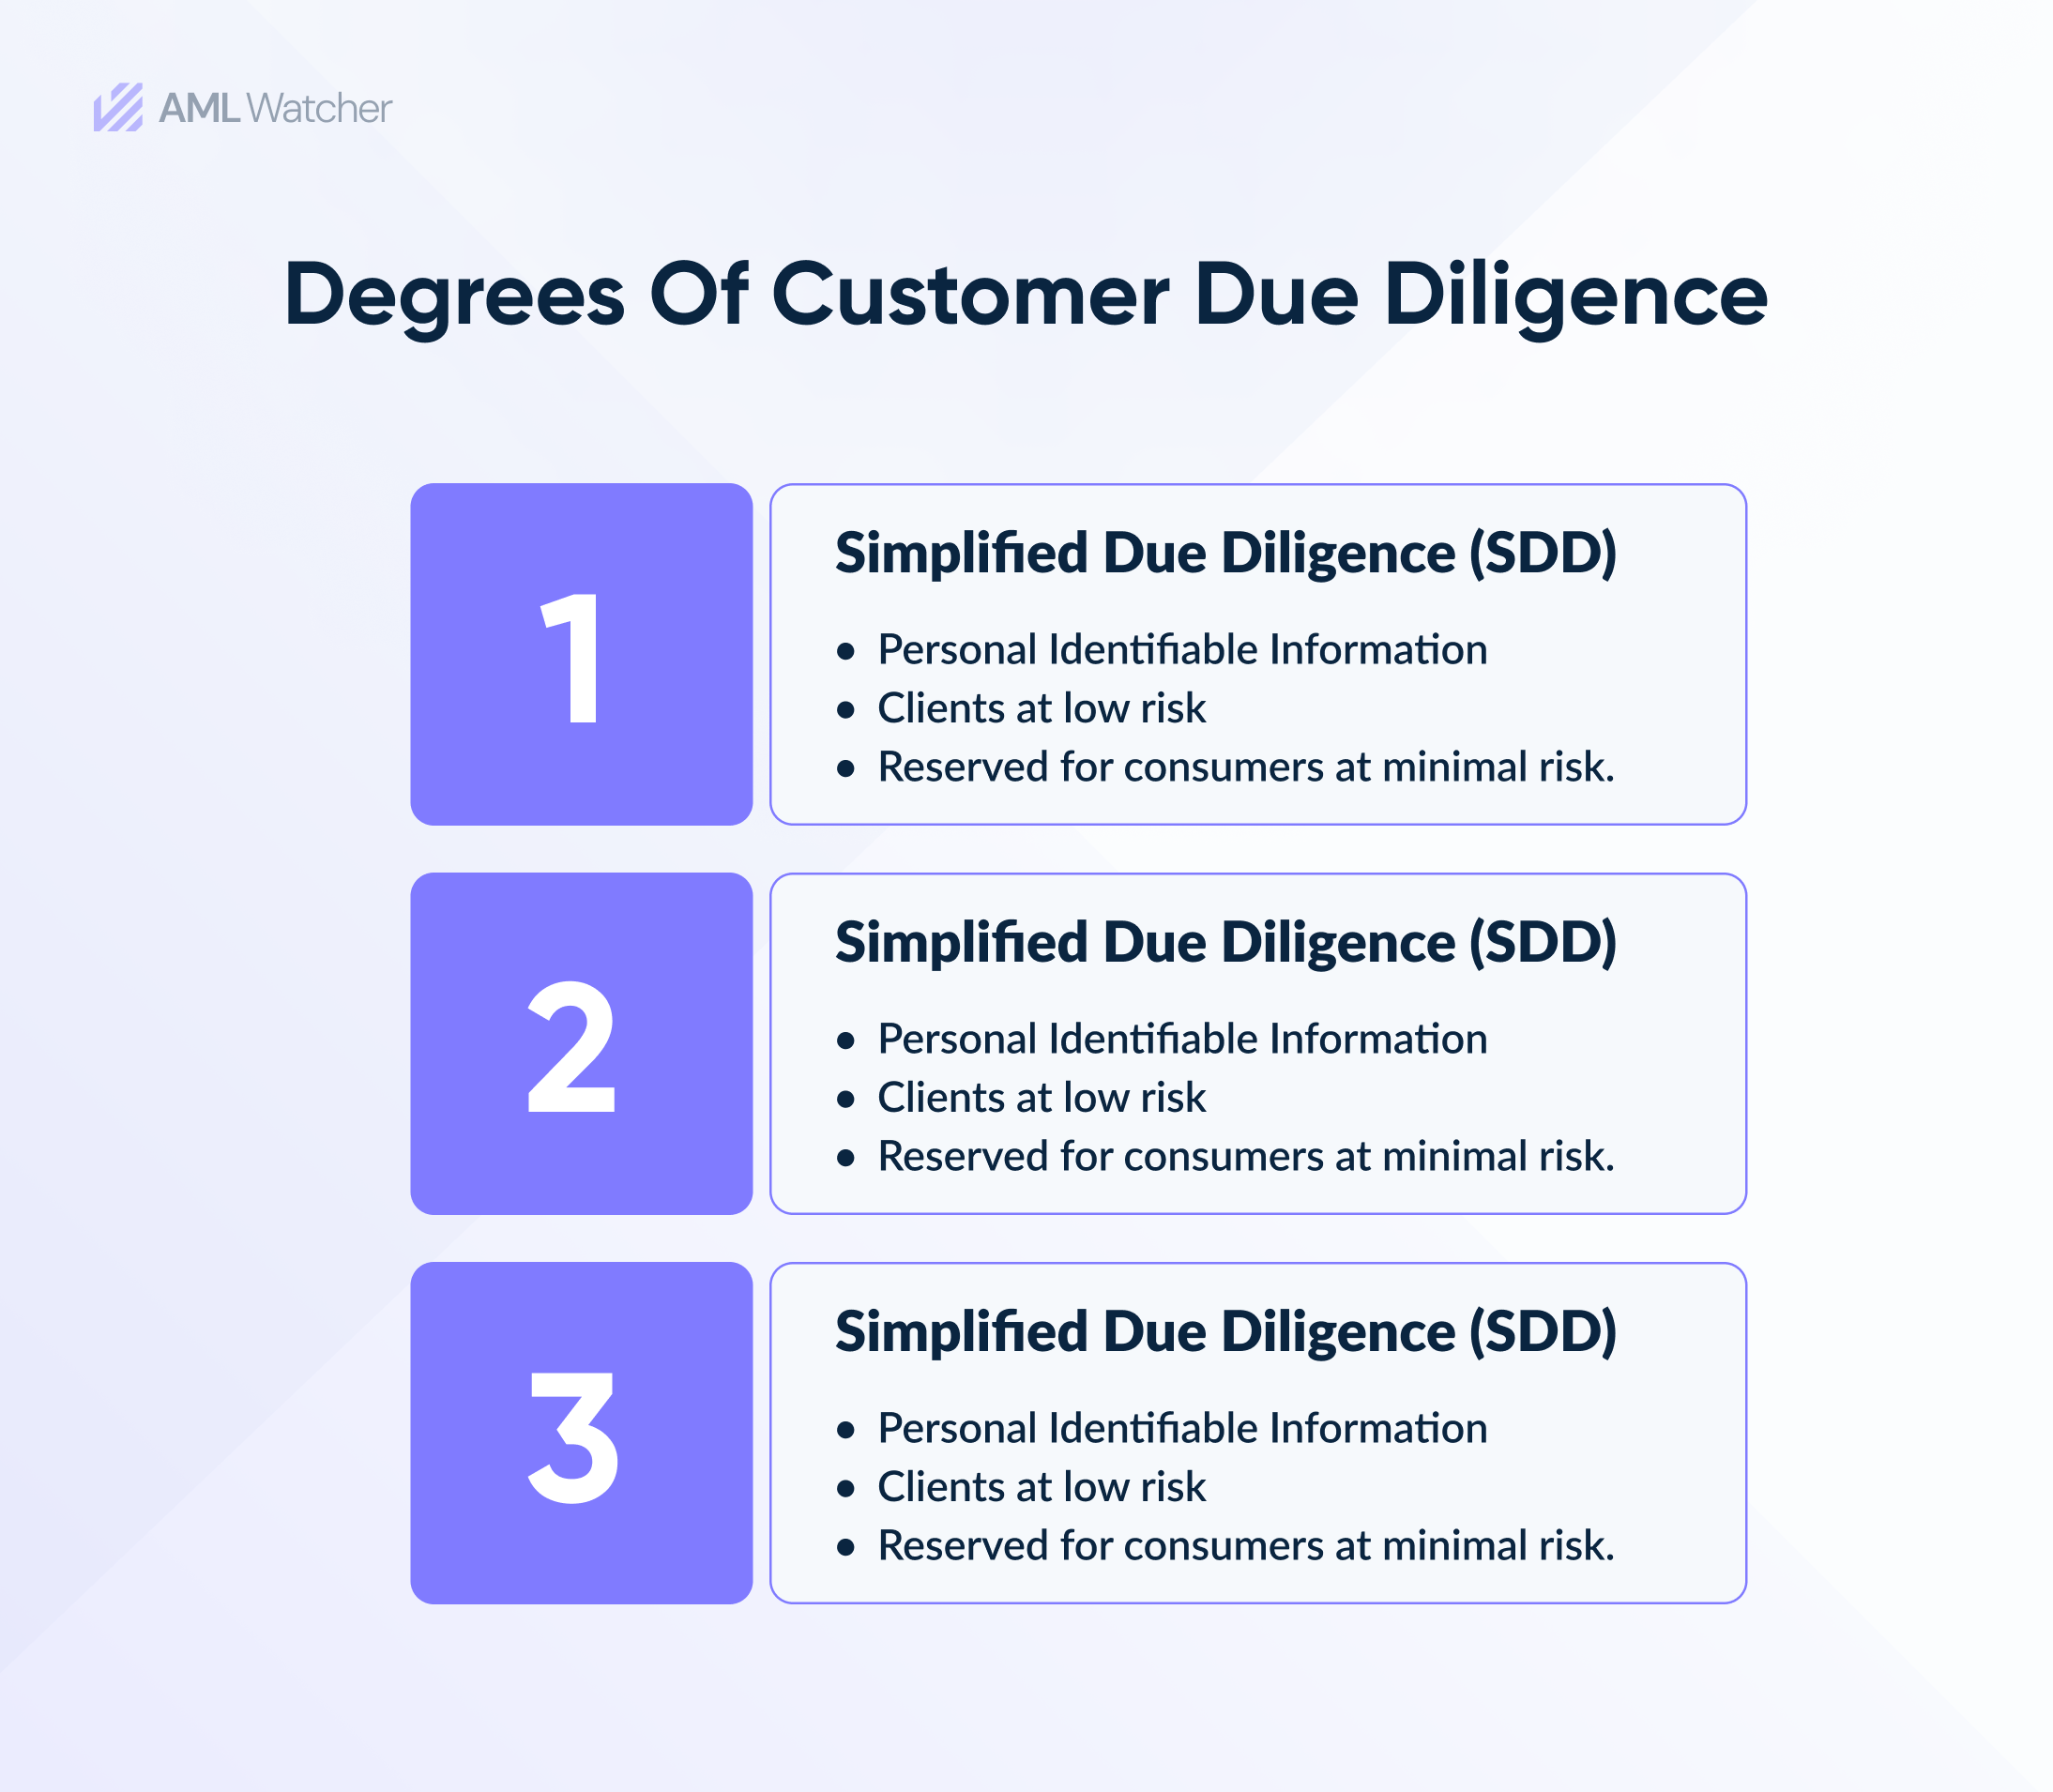 Degrees of Customer Due Diligence